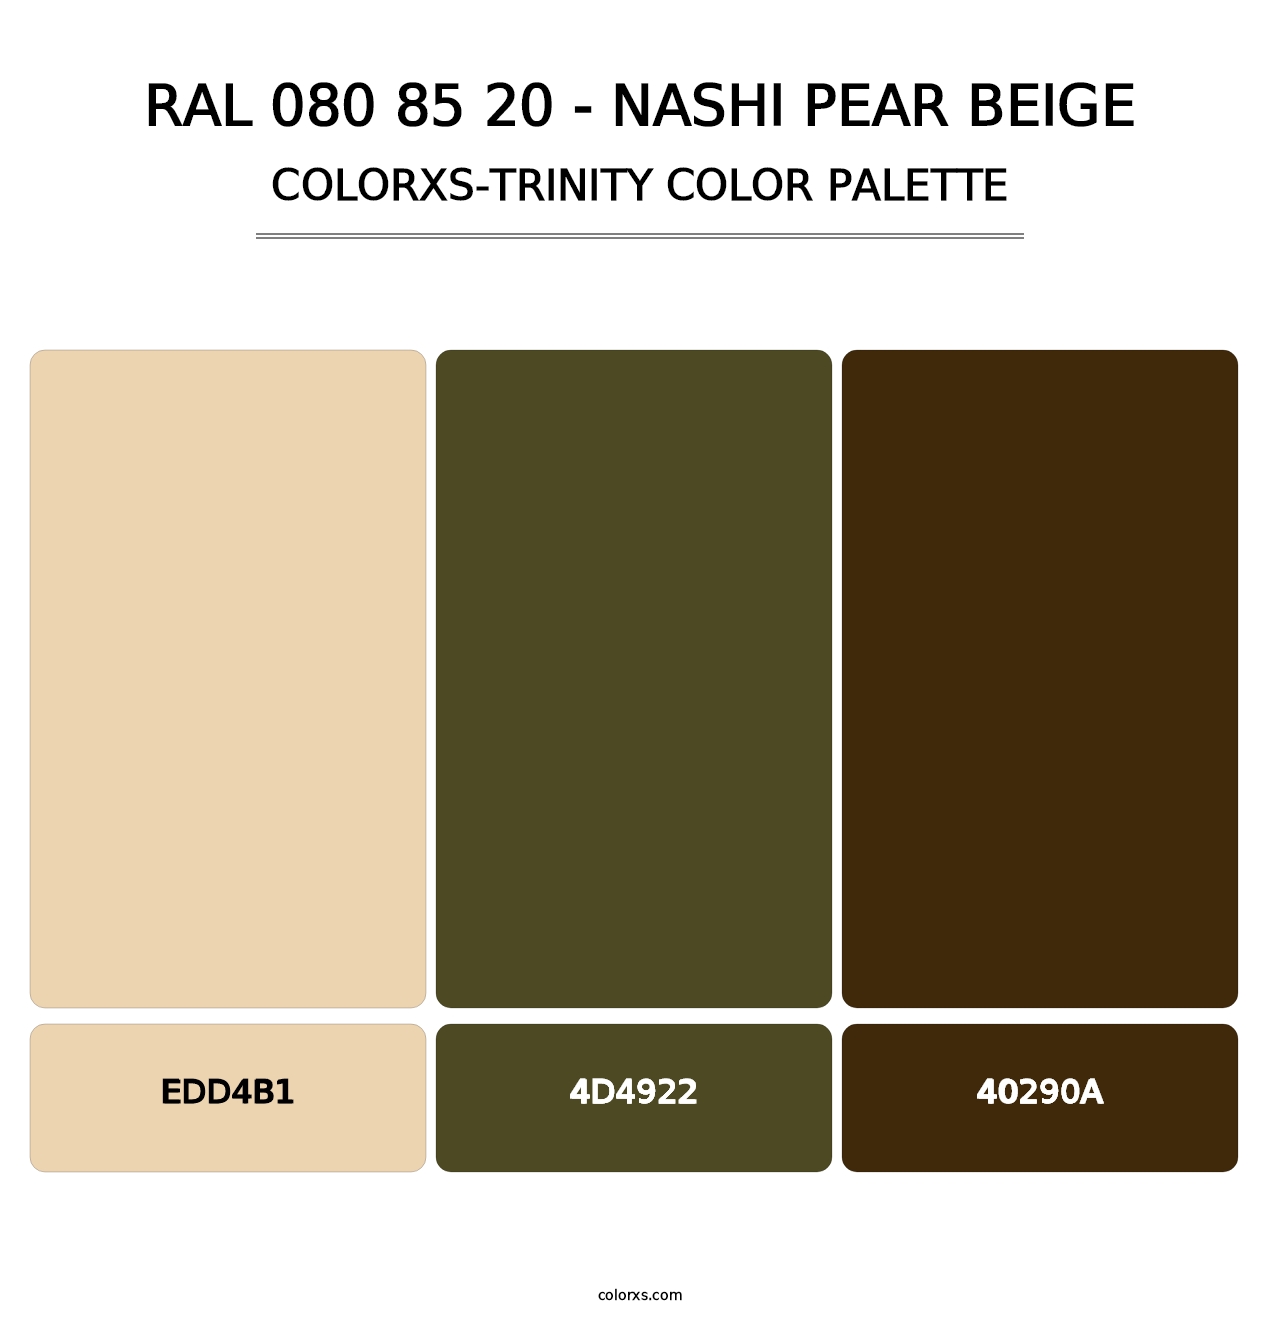 RAL 080 85 20 - Nashi Pear Beige - Colorxs Trinity Palette